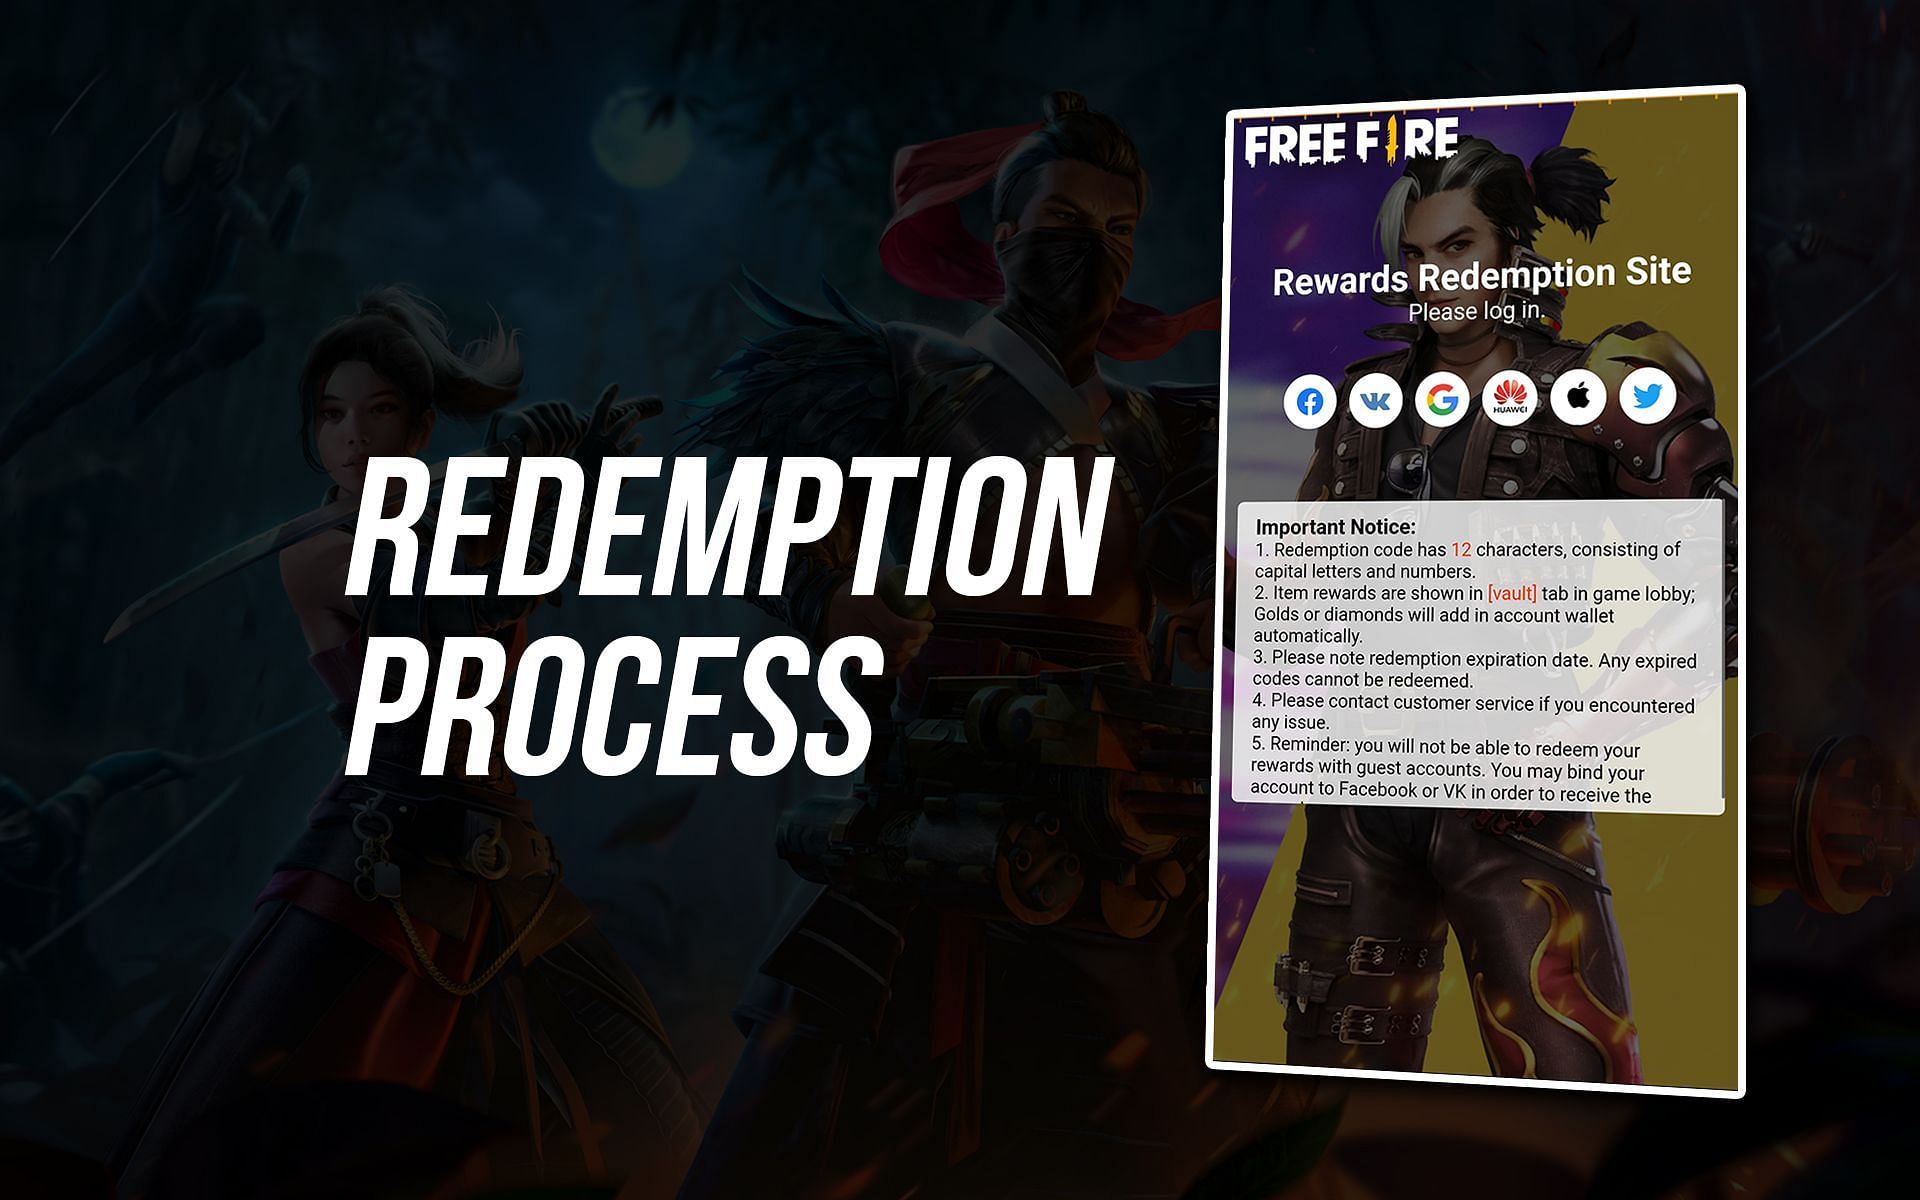 Many players do not know the redemption process for redeem codes (Image via Garena)